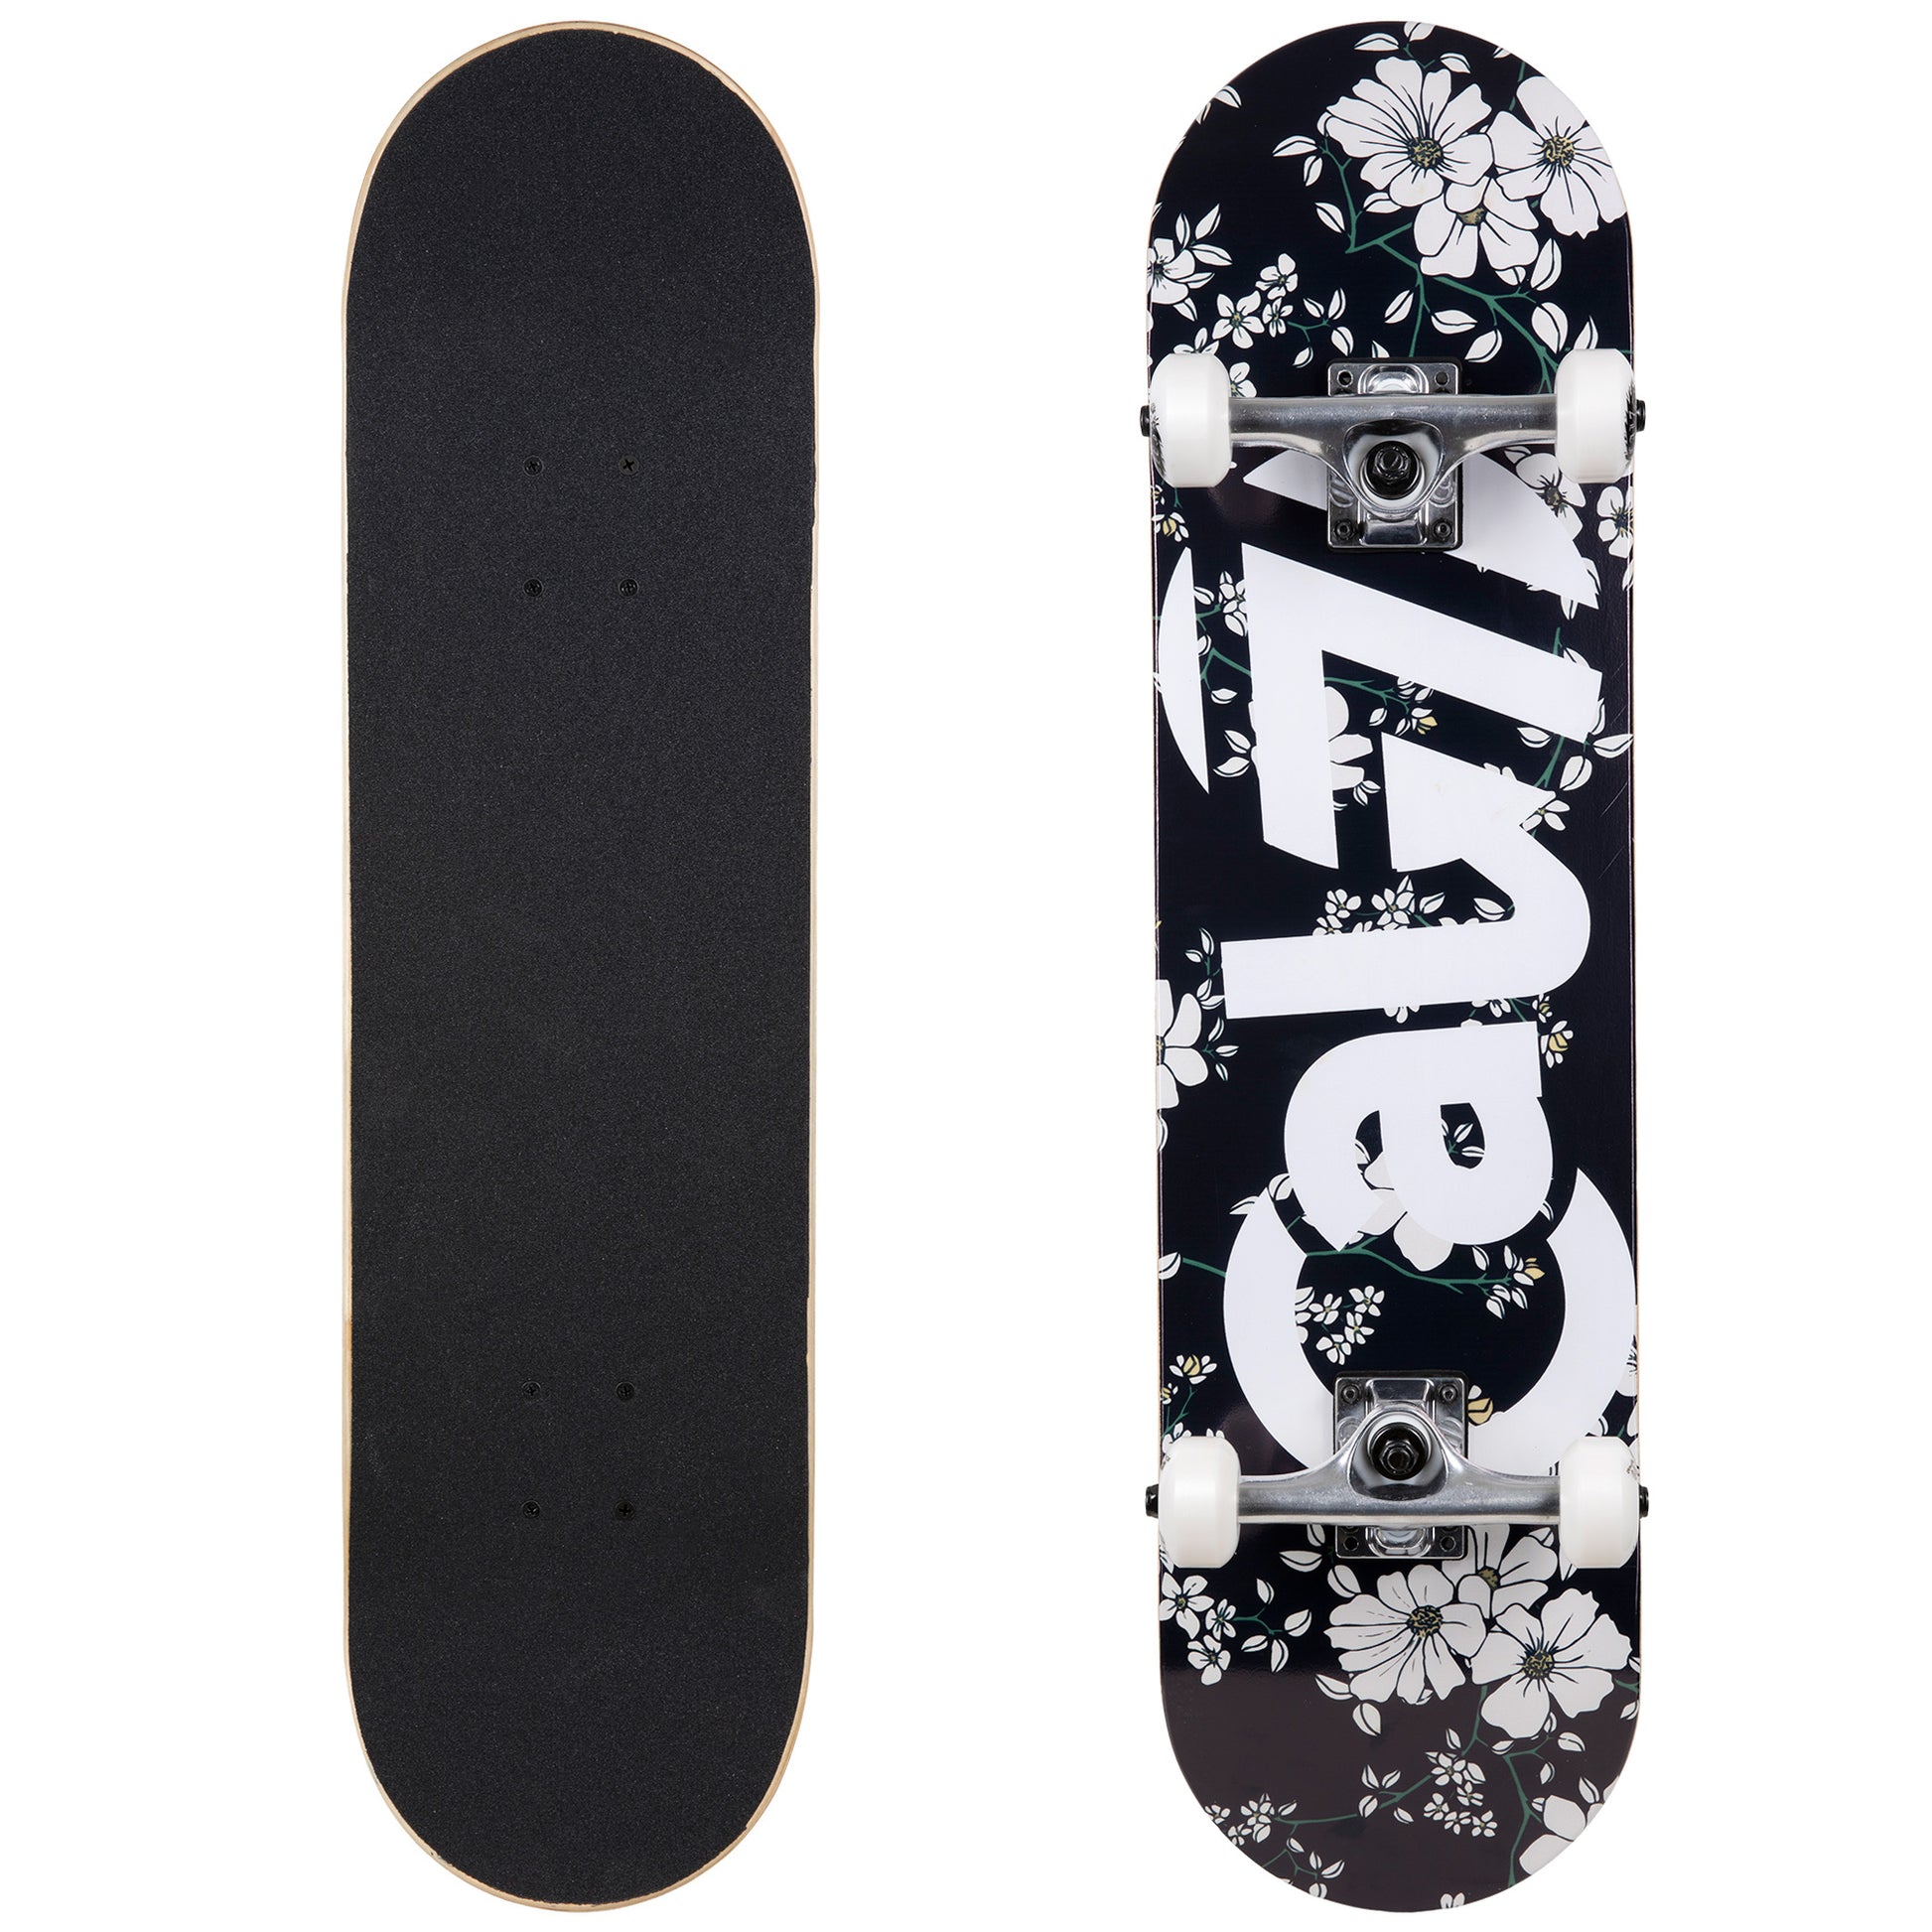 Cal 7 Complete 7.5/7.75/8-Inch Skateboard Petal with Logo and Floral Vine Graphic 